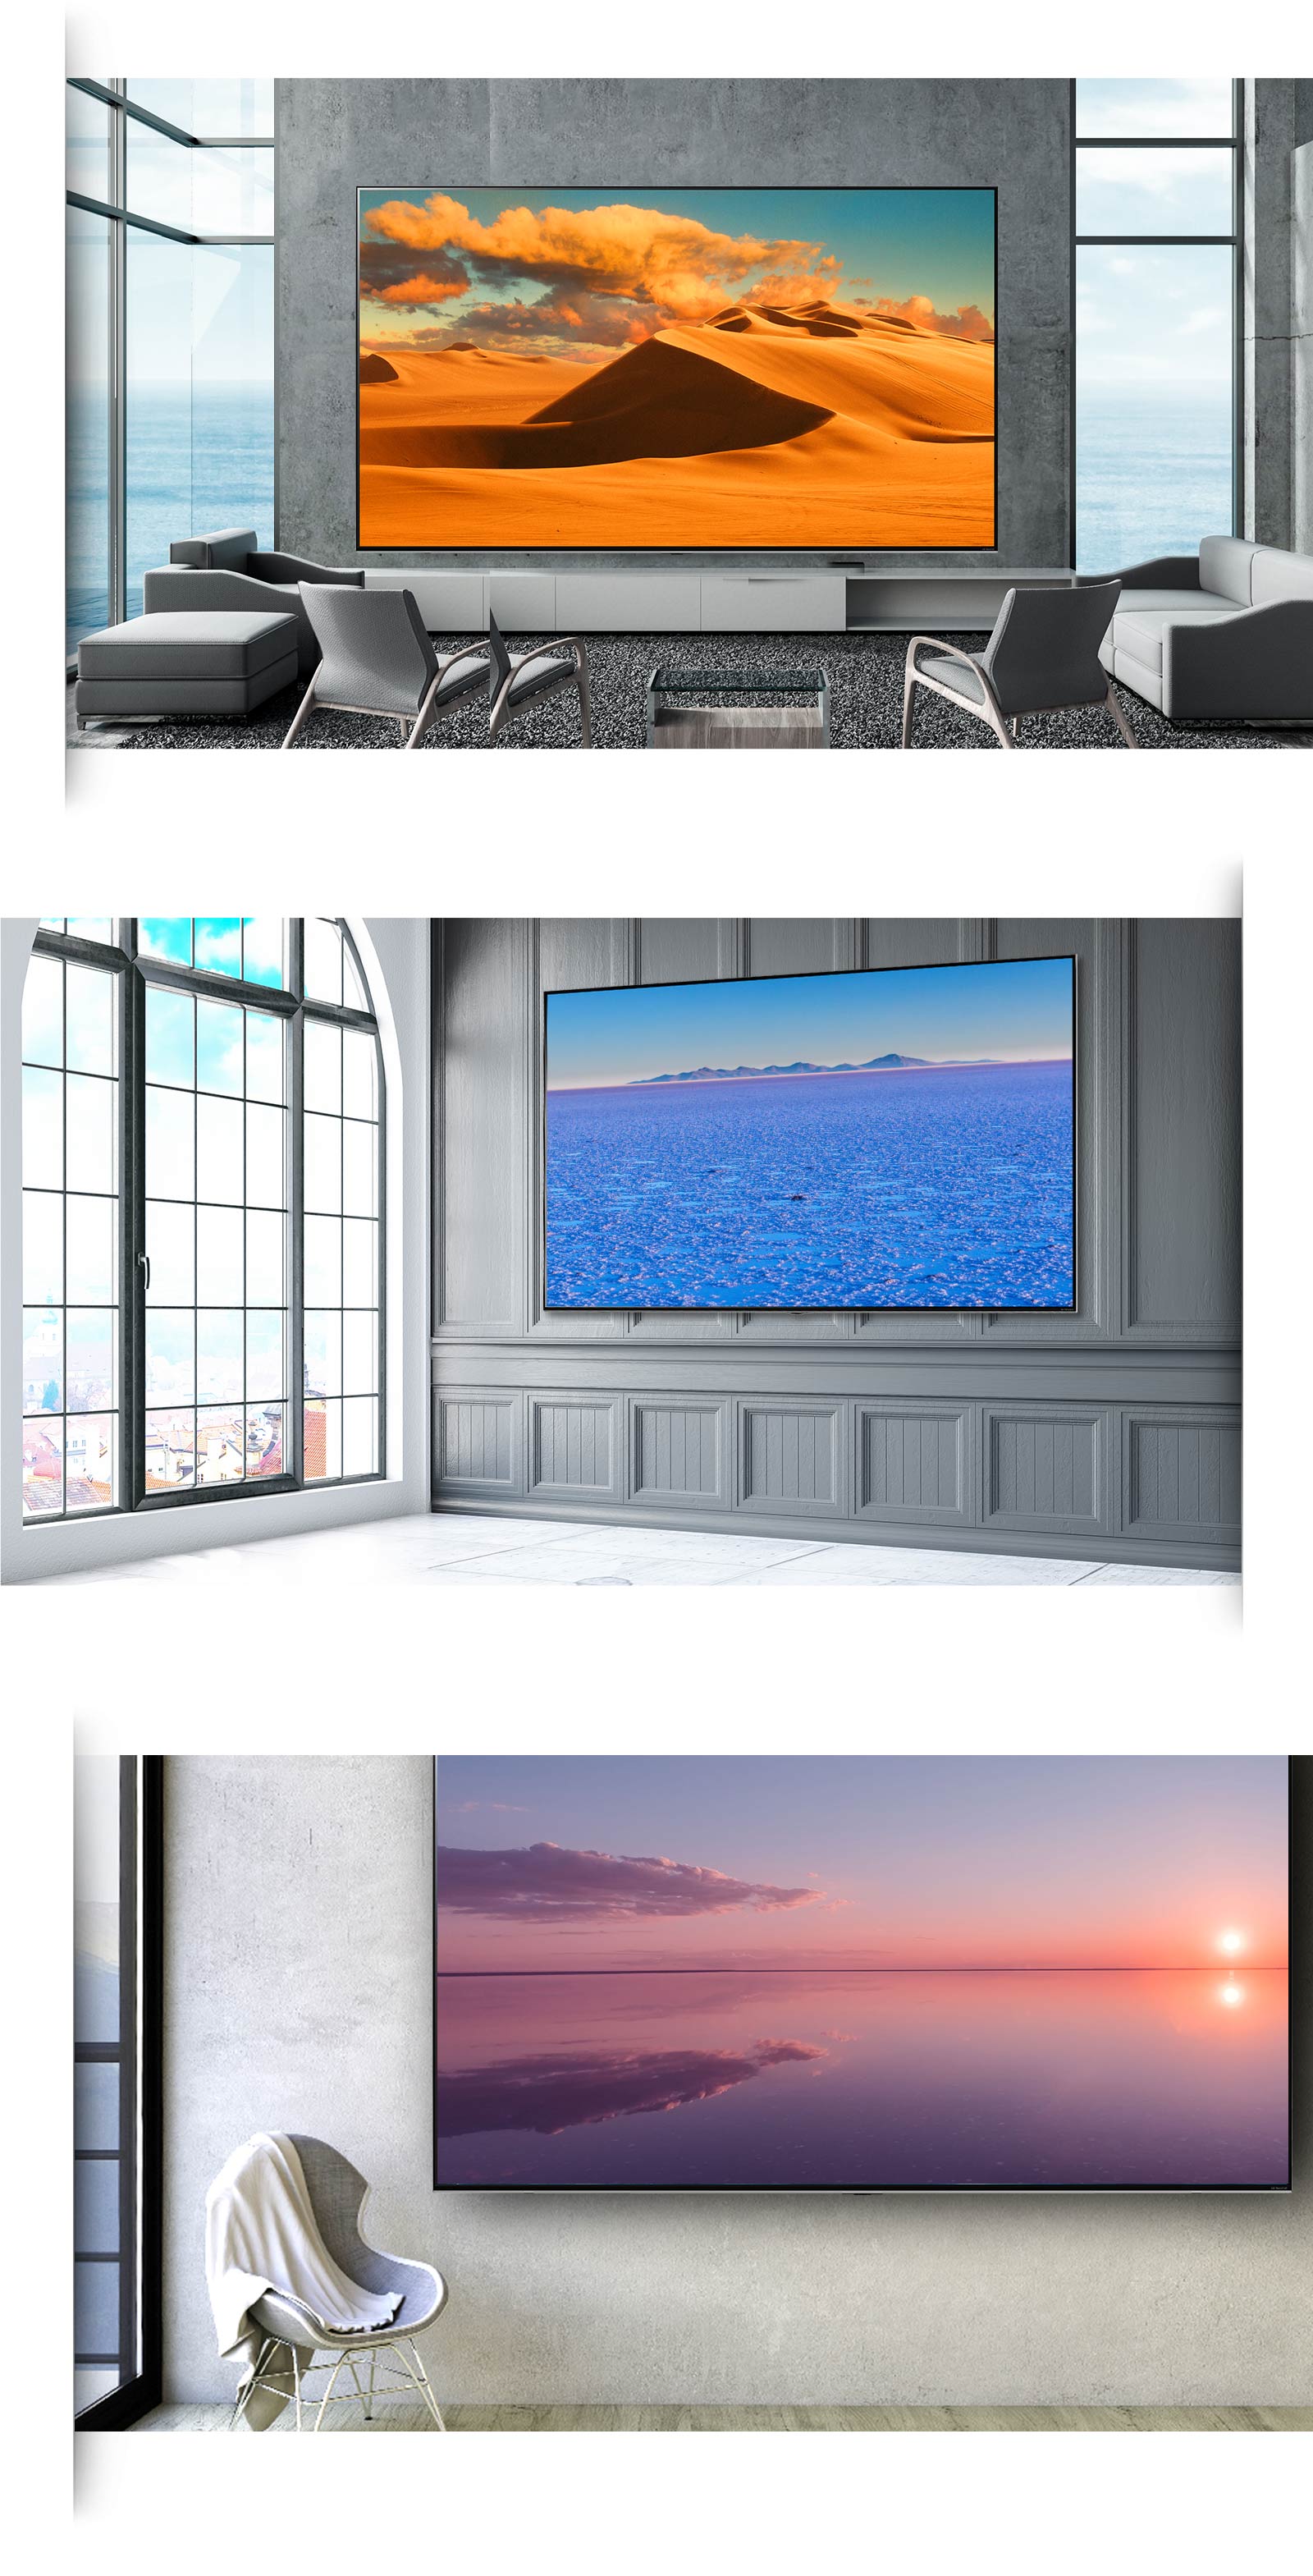 Three images of a large flatscreen TV mounted against the wall in various modern interiors.​